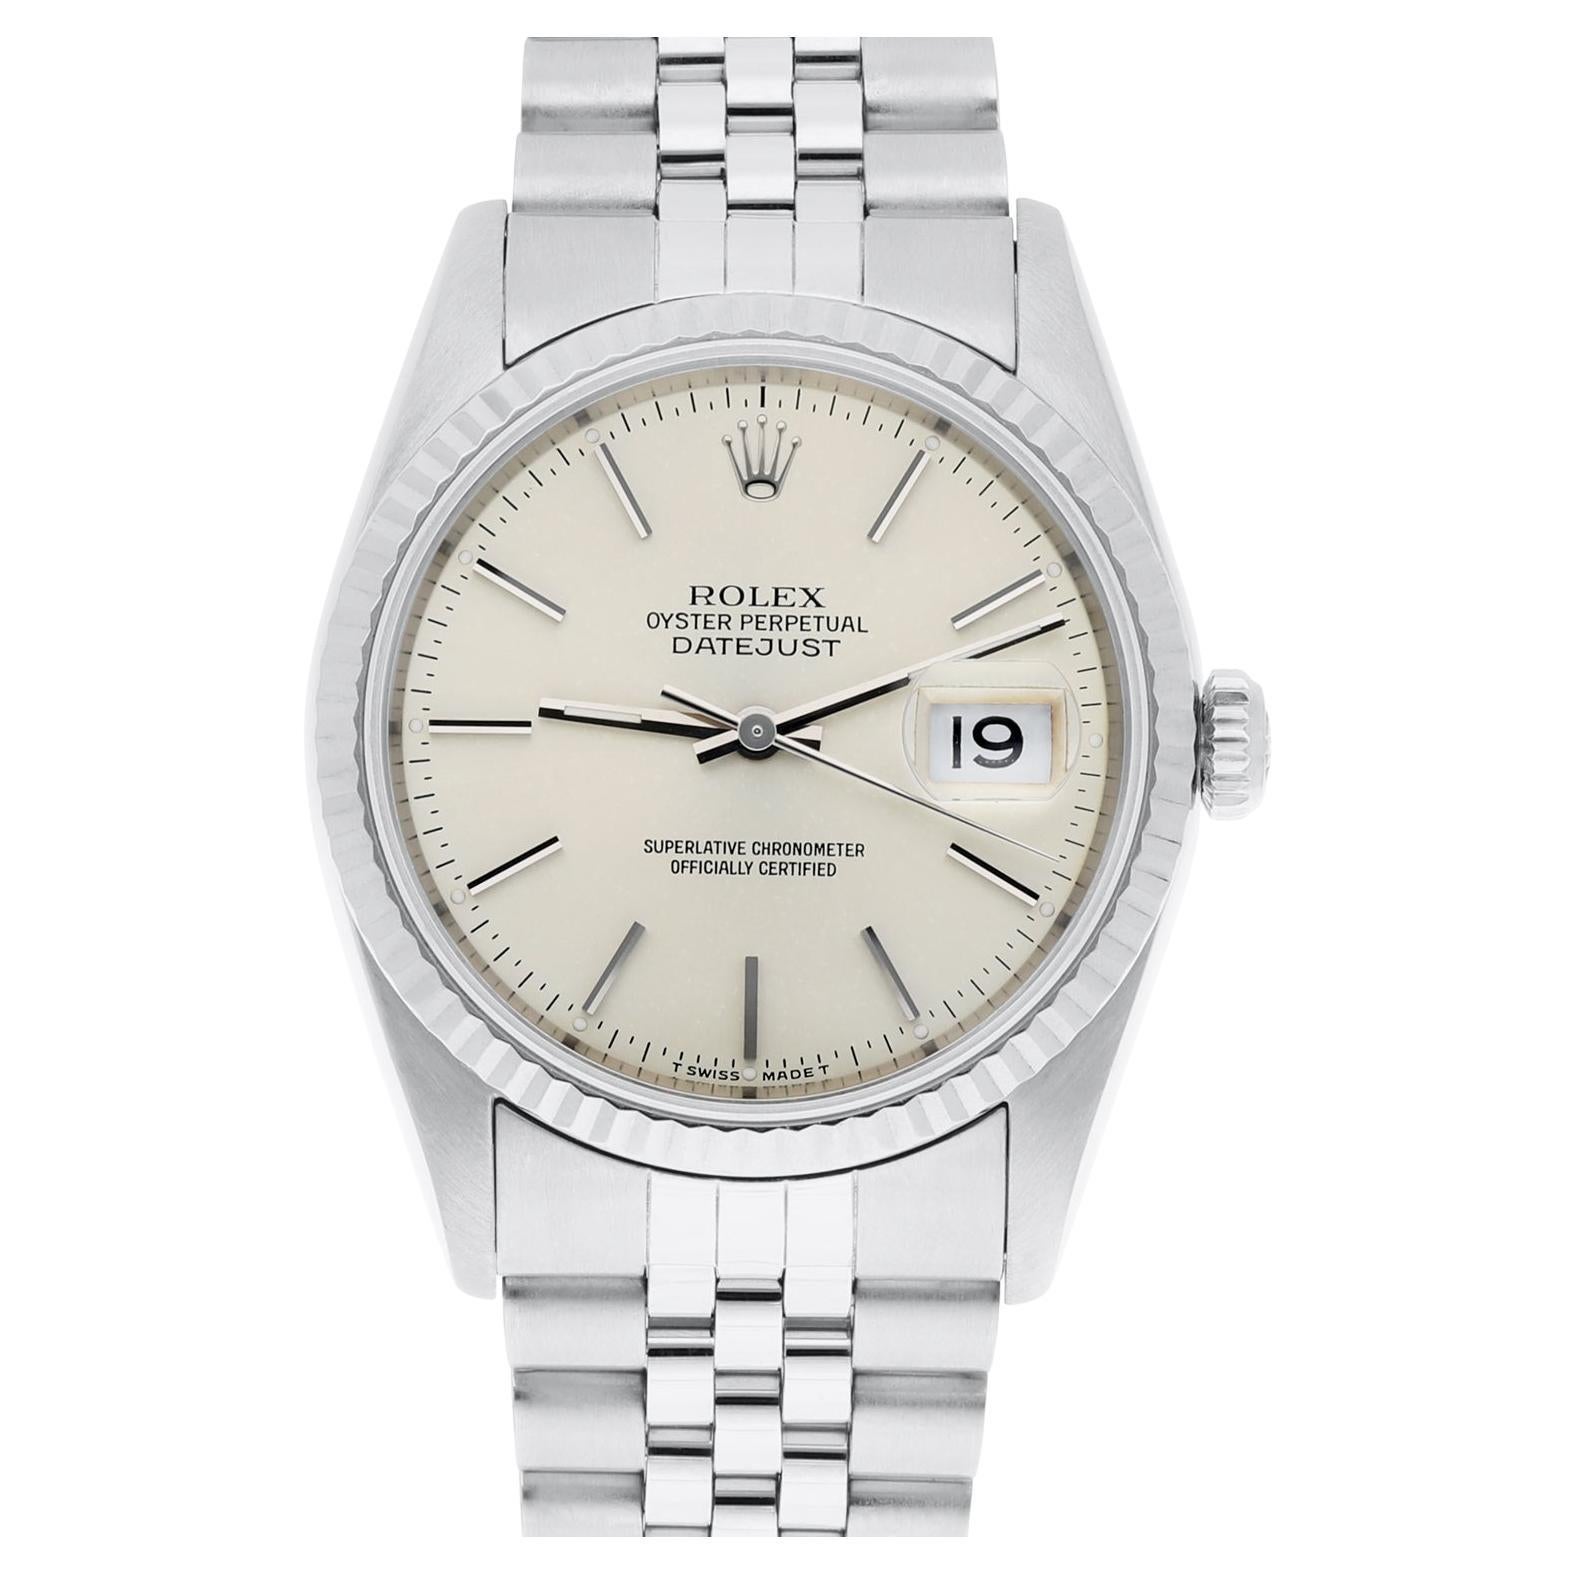 Rolex Datejust 36mm Stainless Steel 16234 Silver Dial, Jubilee Circa 1994